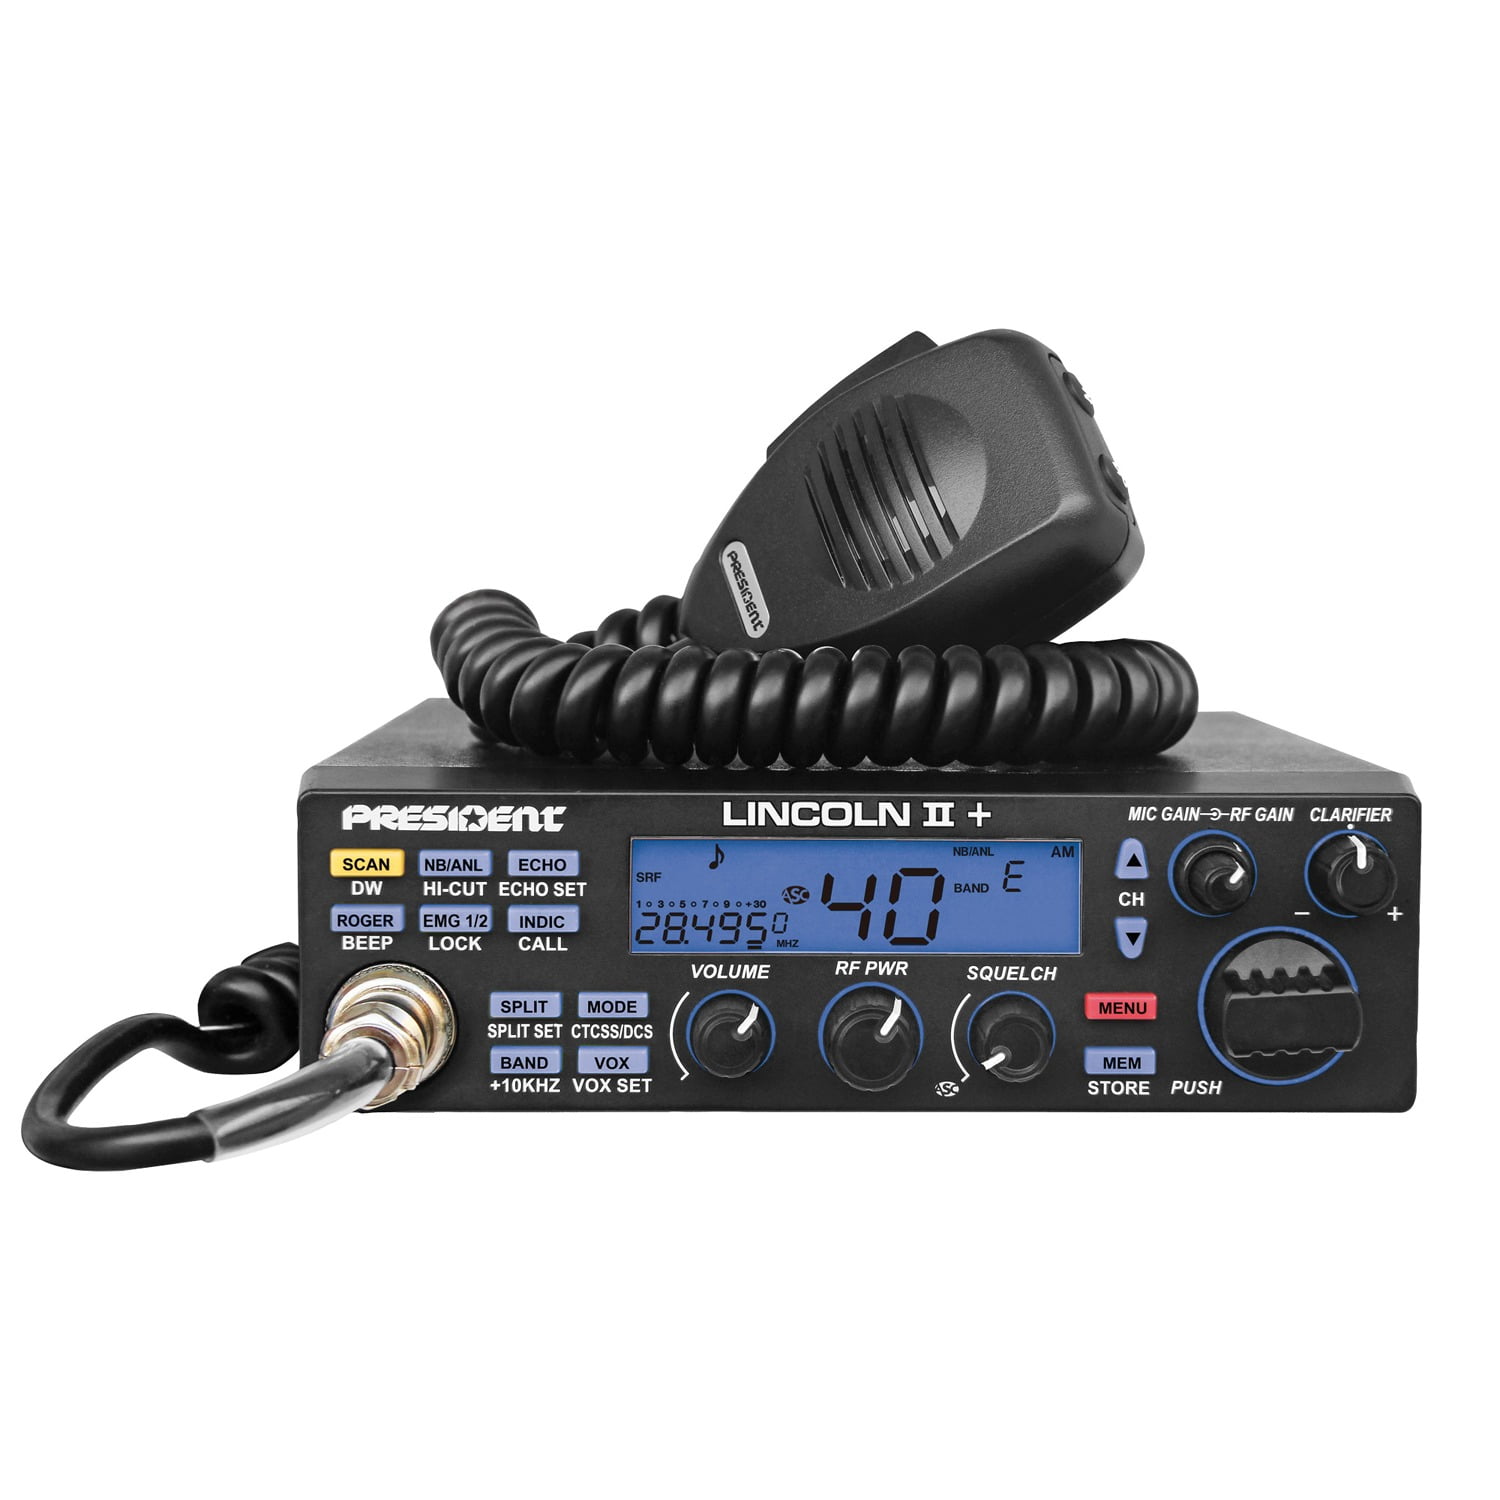 Picture of President LINCOLNIIPlus 10 - 12 m, 50 W AM & FM, LSB & USB, CW Transceiver with 3 Face